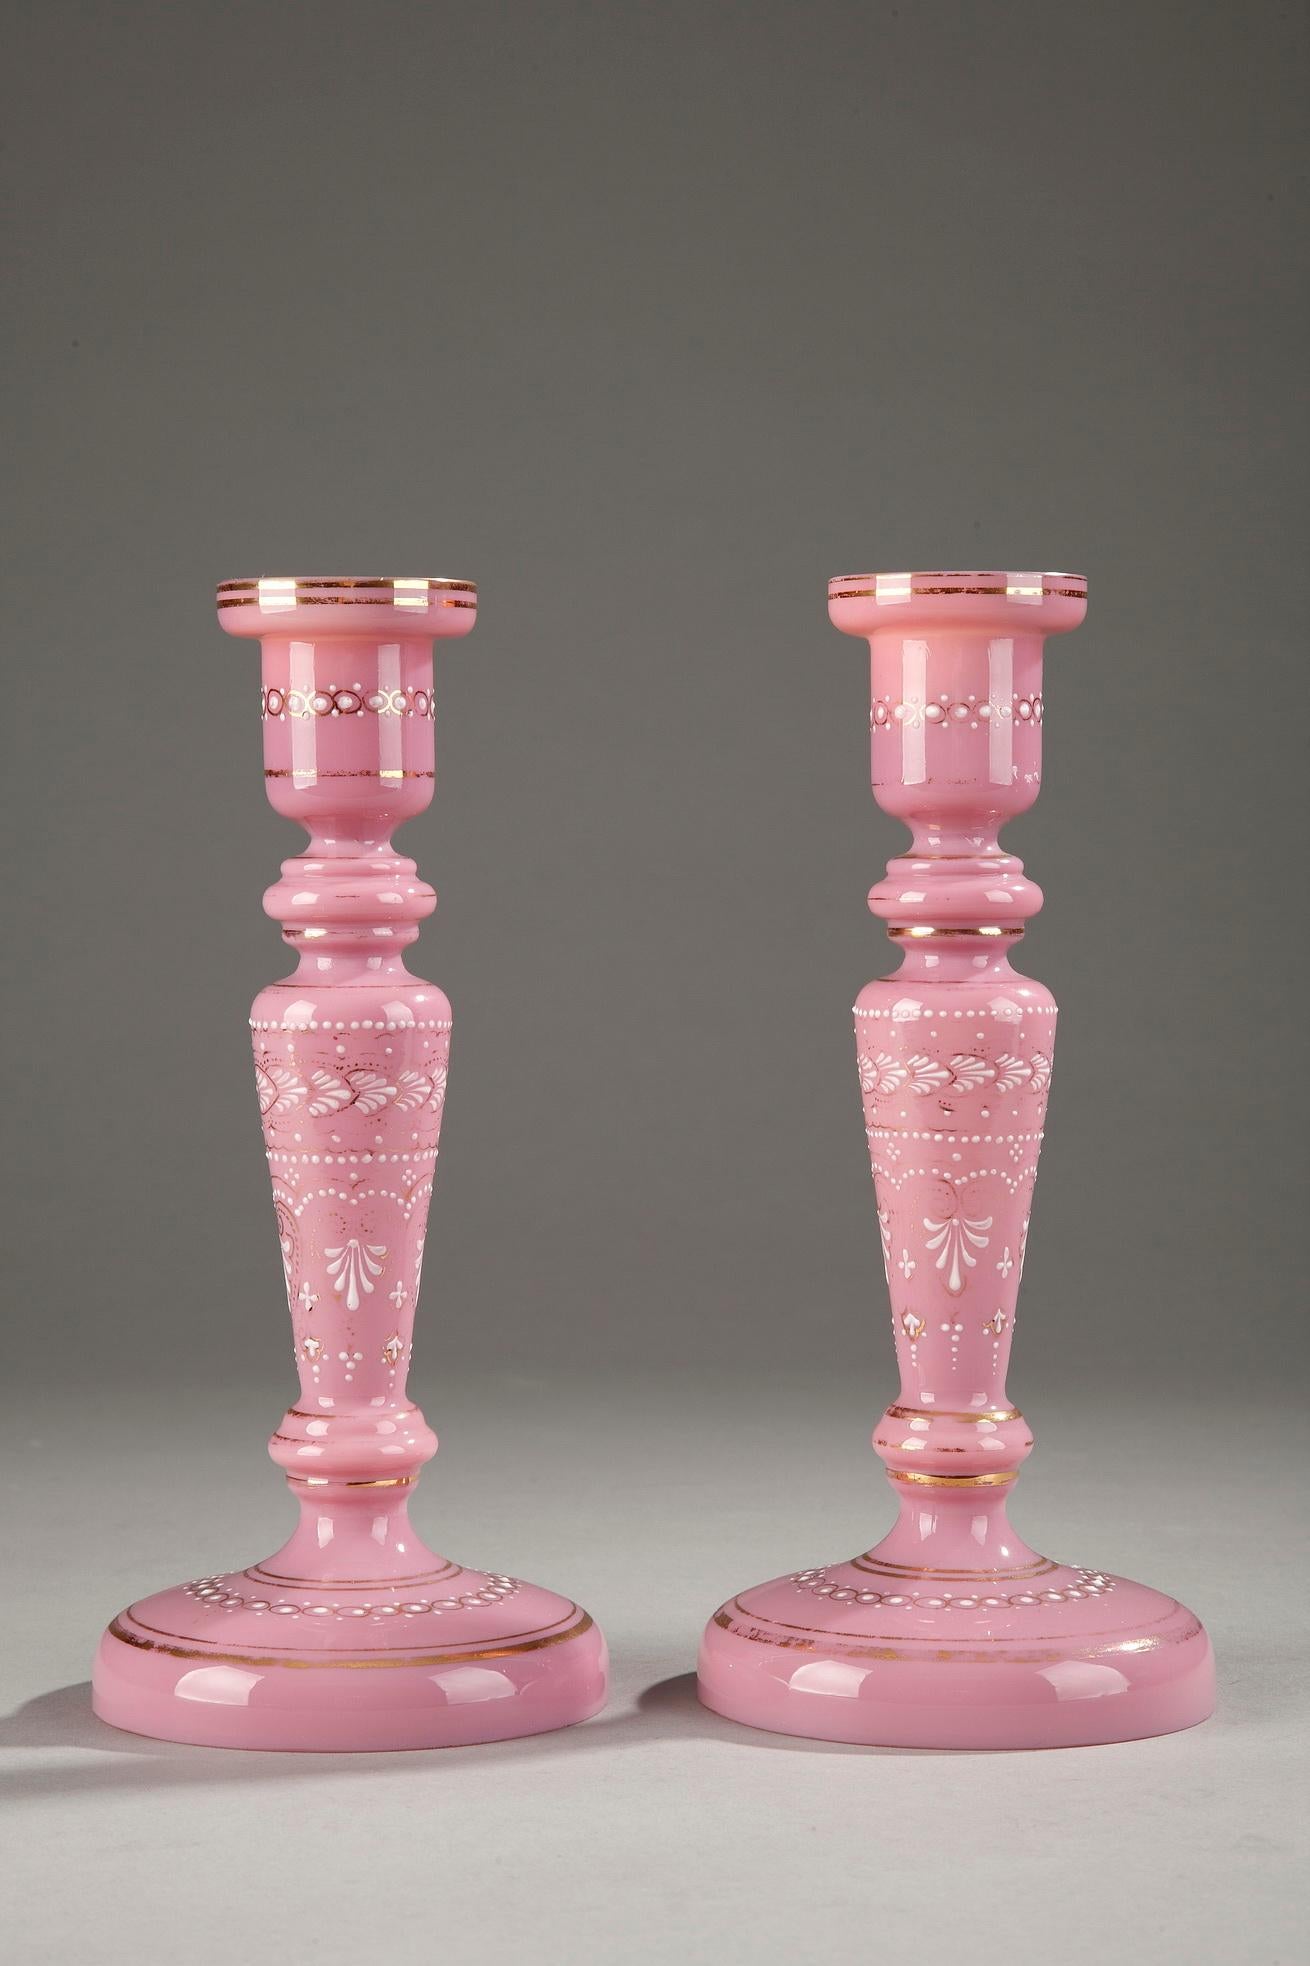 A collection of 1850 pink opaline composed of:
1/ One flask decorated in white enamel with palmettes, small dots and floral motifs. Gold bands accent the base and the neck. The stopper is topped with a ball. Very delicate enamel work. Dimensions: L